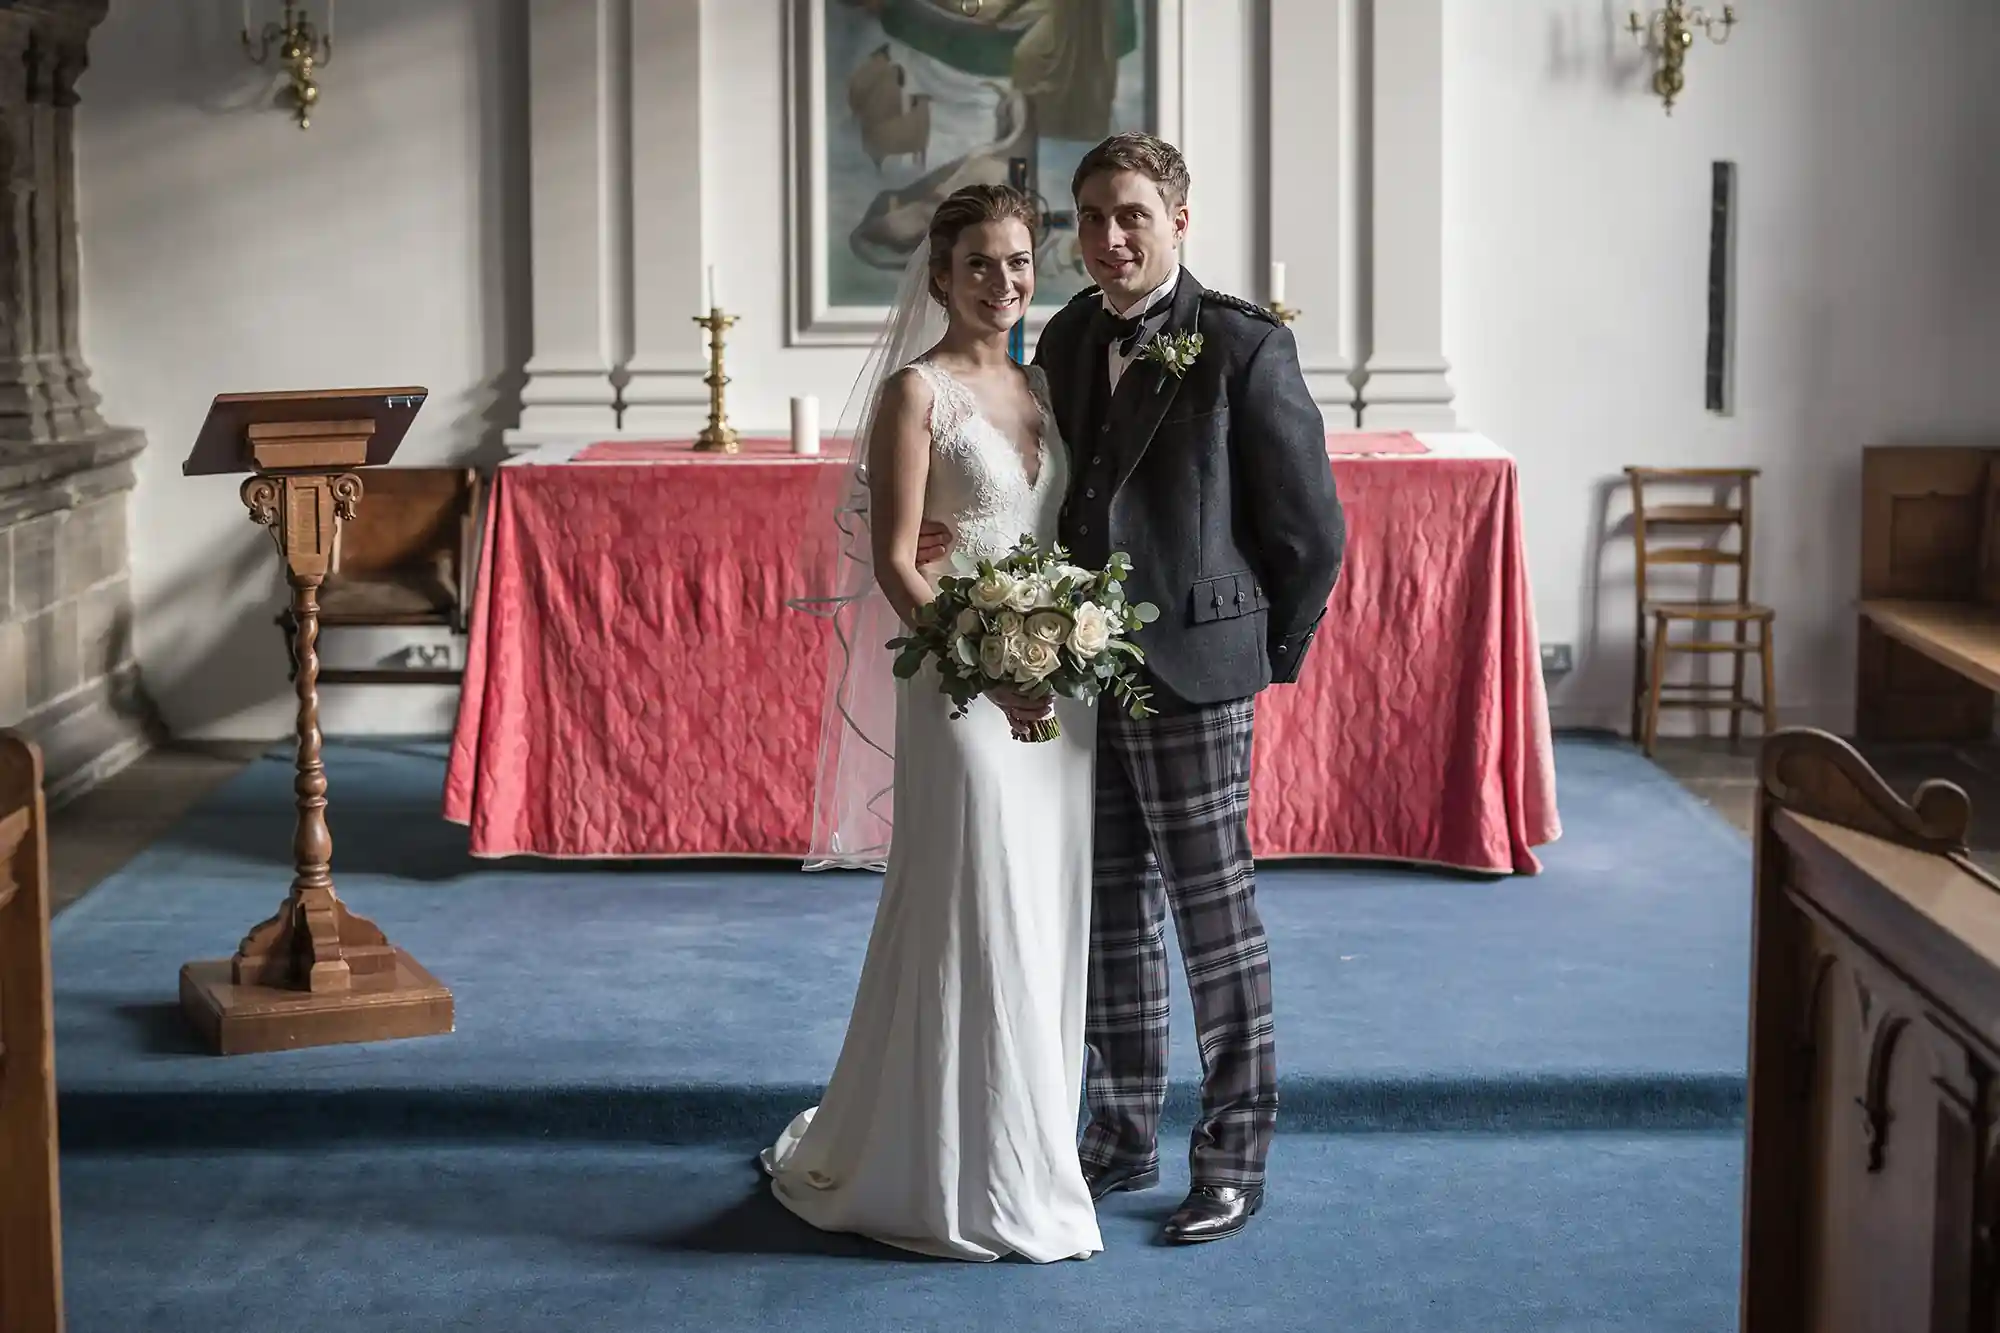 A bride in a white dress and a groom in a kilt and jacket stand together in a church, holding hands and smiling.